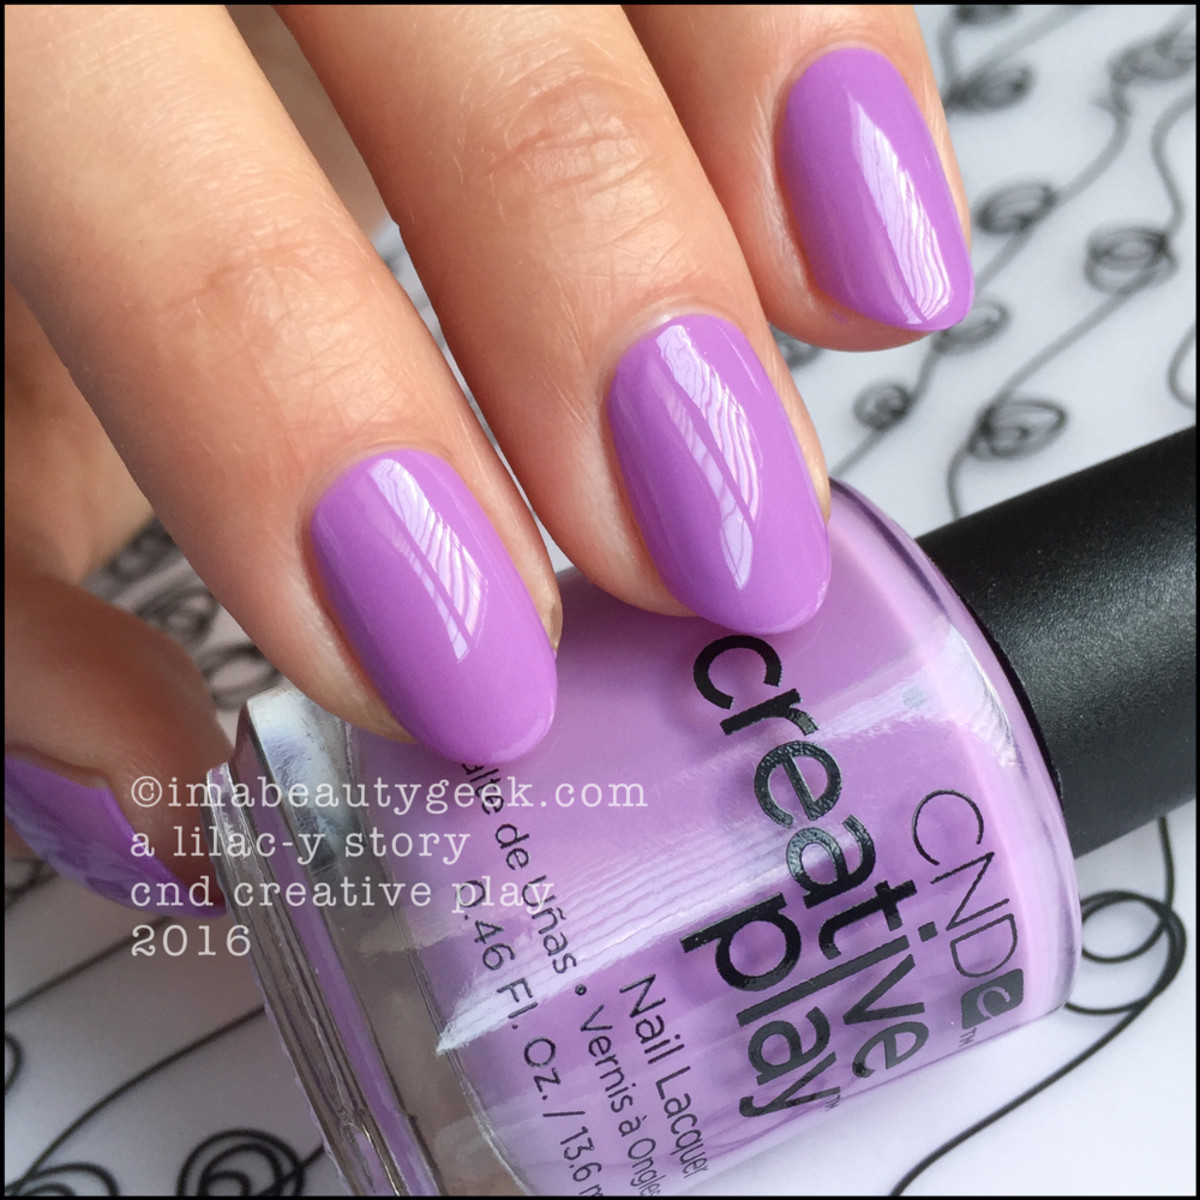 CND Creative Play A Lilacy Story_CND Creative Play Nail Polish Swatches